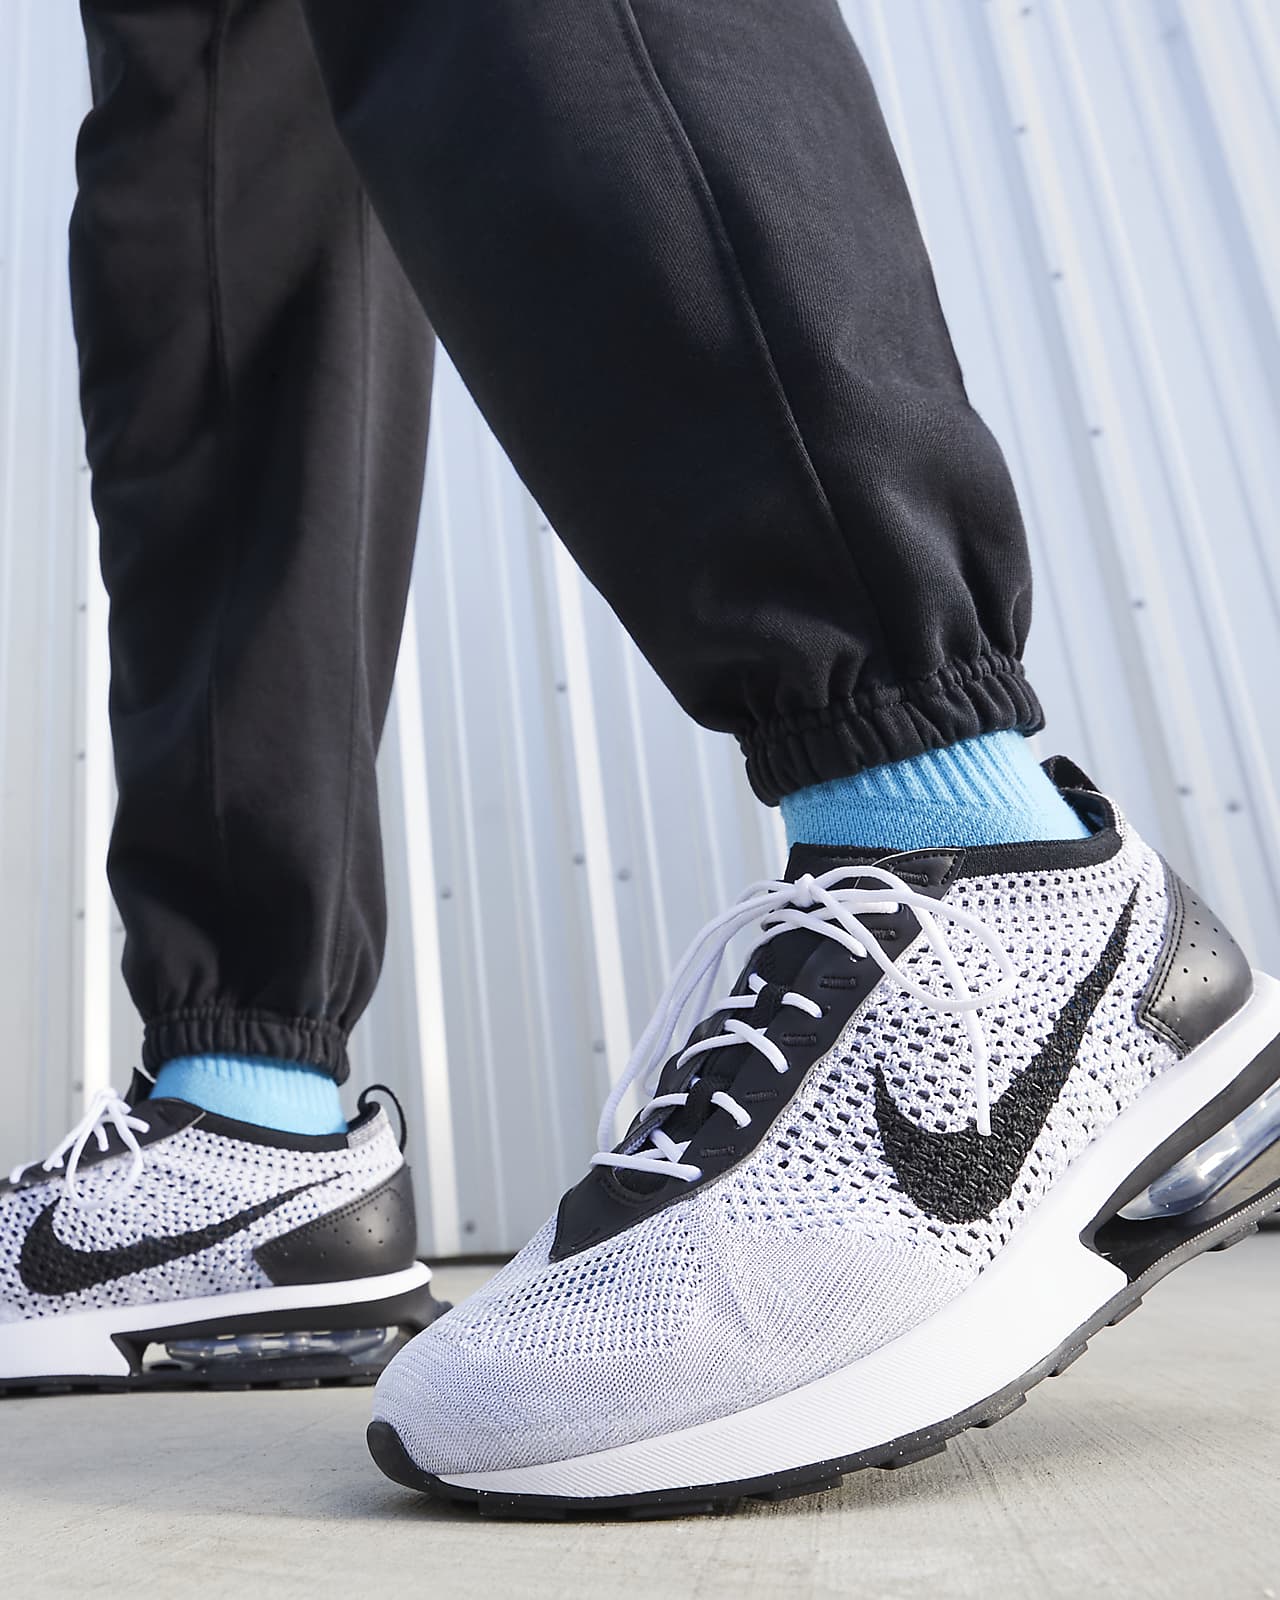 Healthy food Experiment Council Nike Air Max Flyknit Racer Men's Shoes. Nike ID